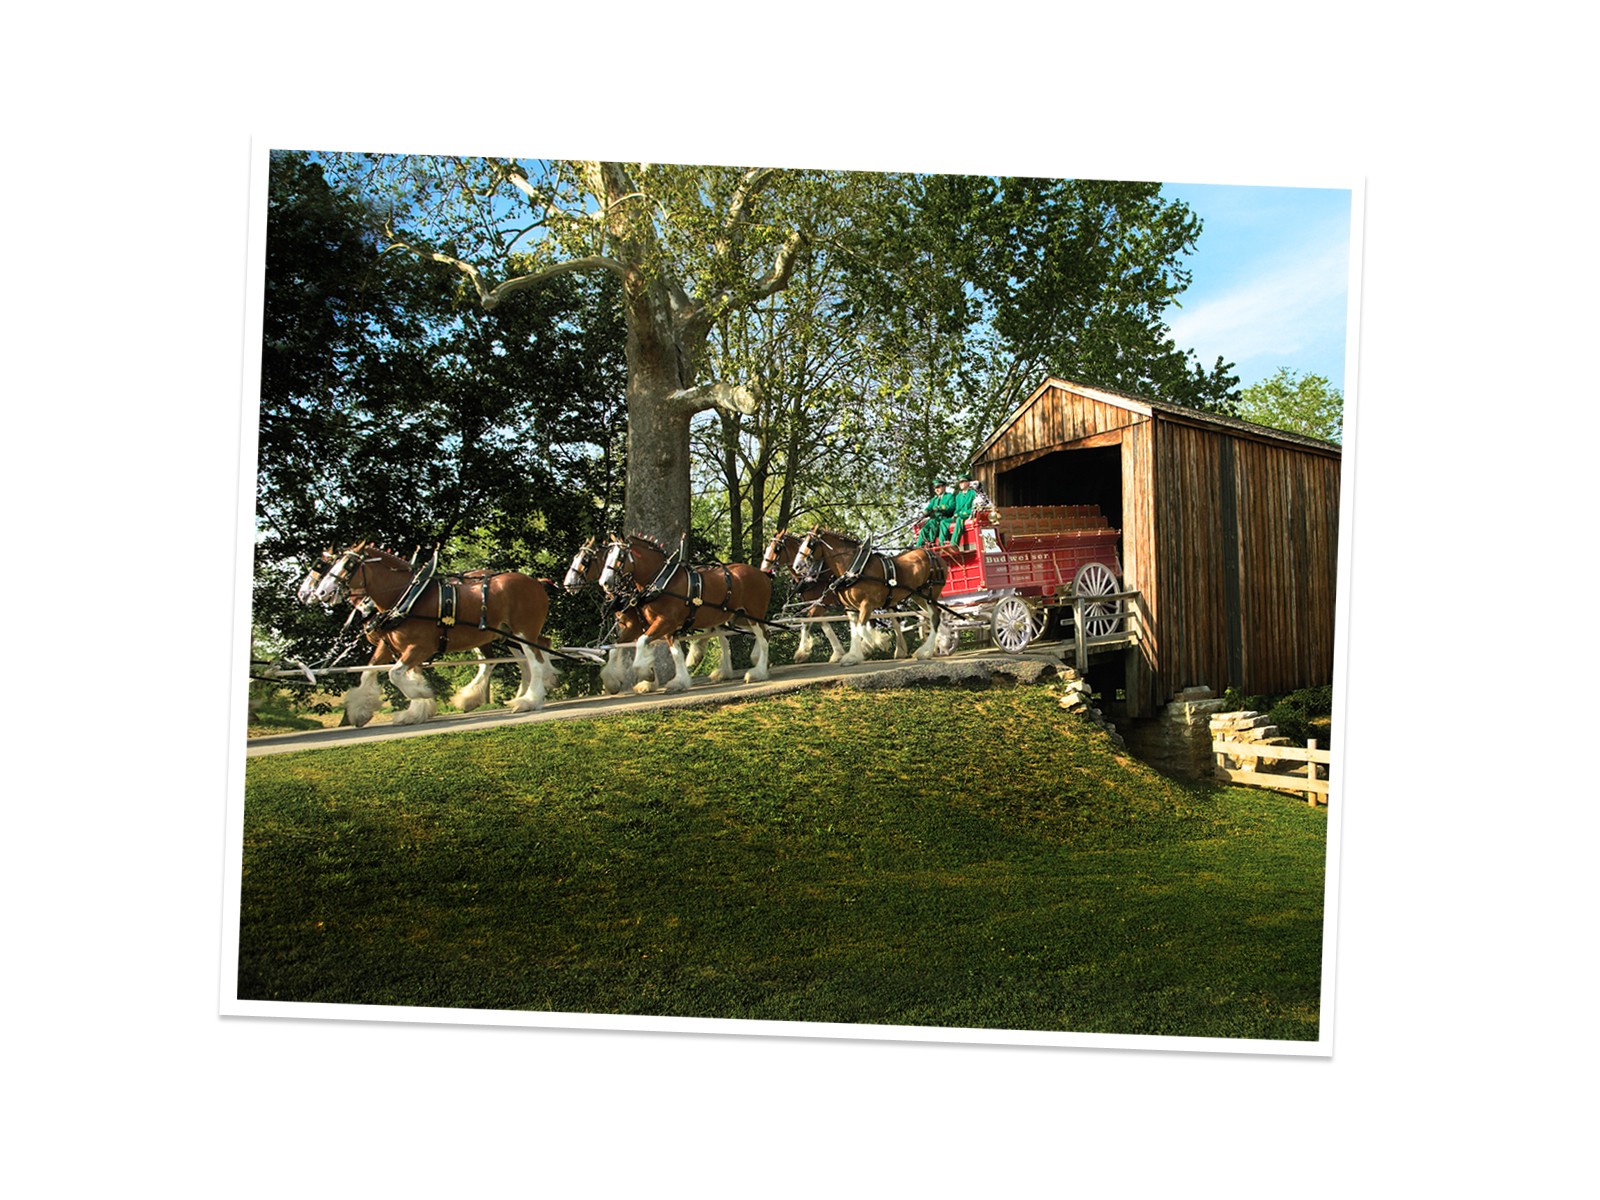 Budweiser Clydesdales Carriage Standard Image Brands Ads